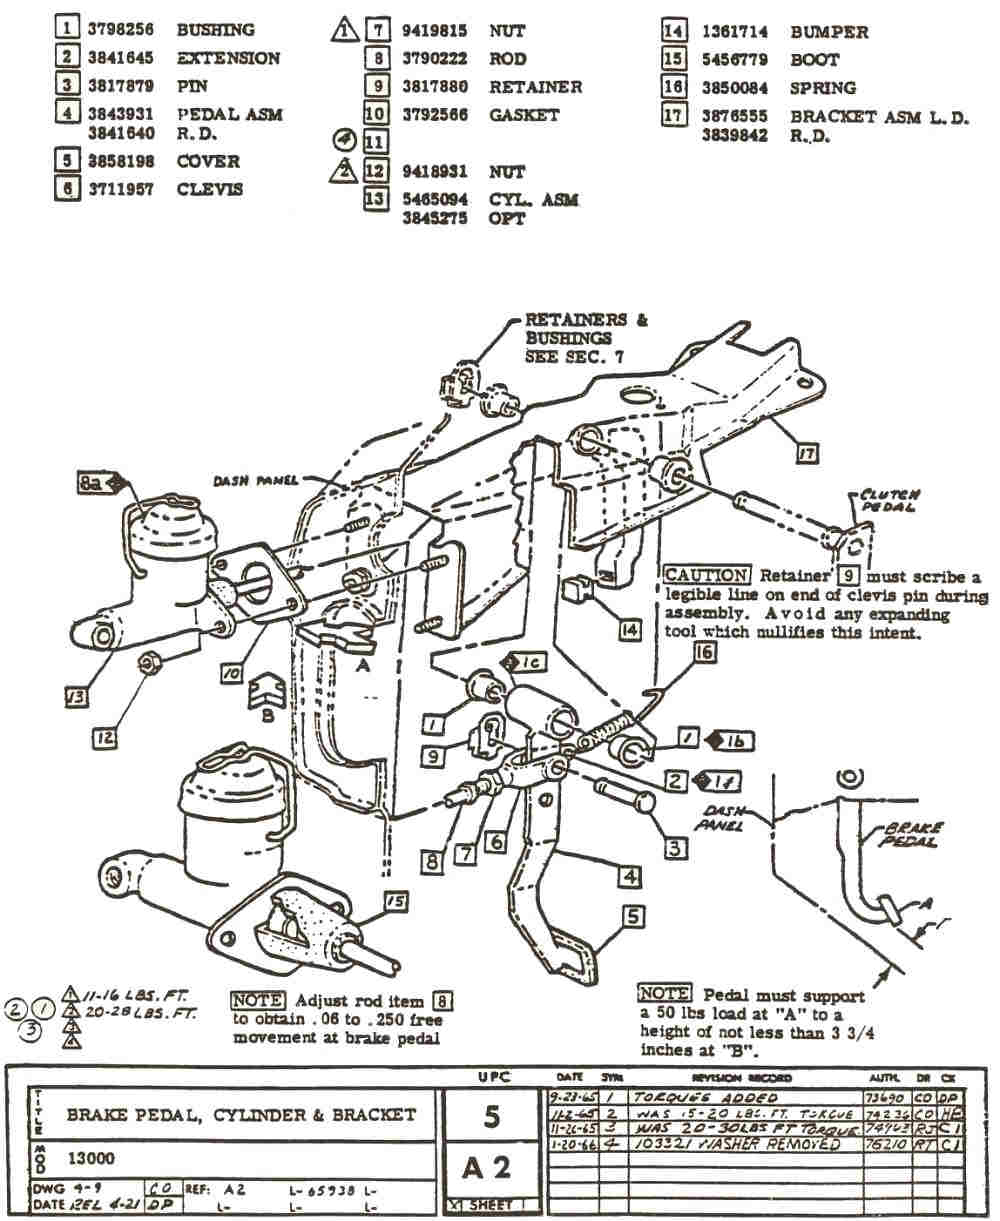 1966 CHEVELLE FACTORY ASSEMBLY INSTRUCTION MANUAL